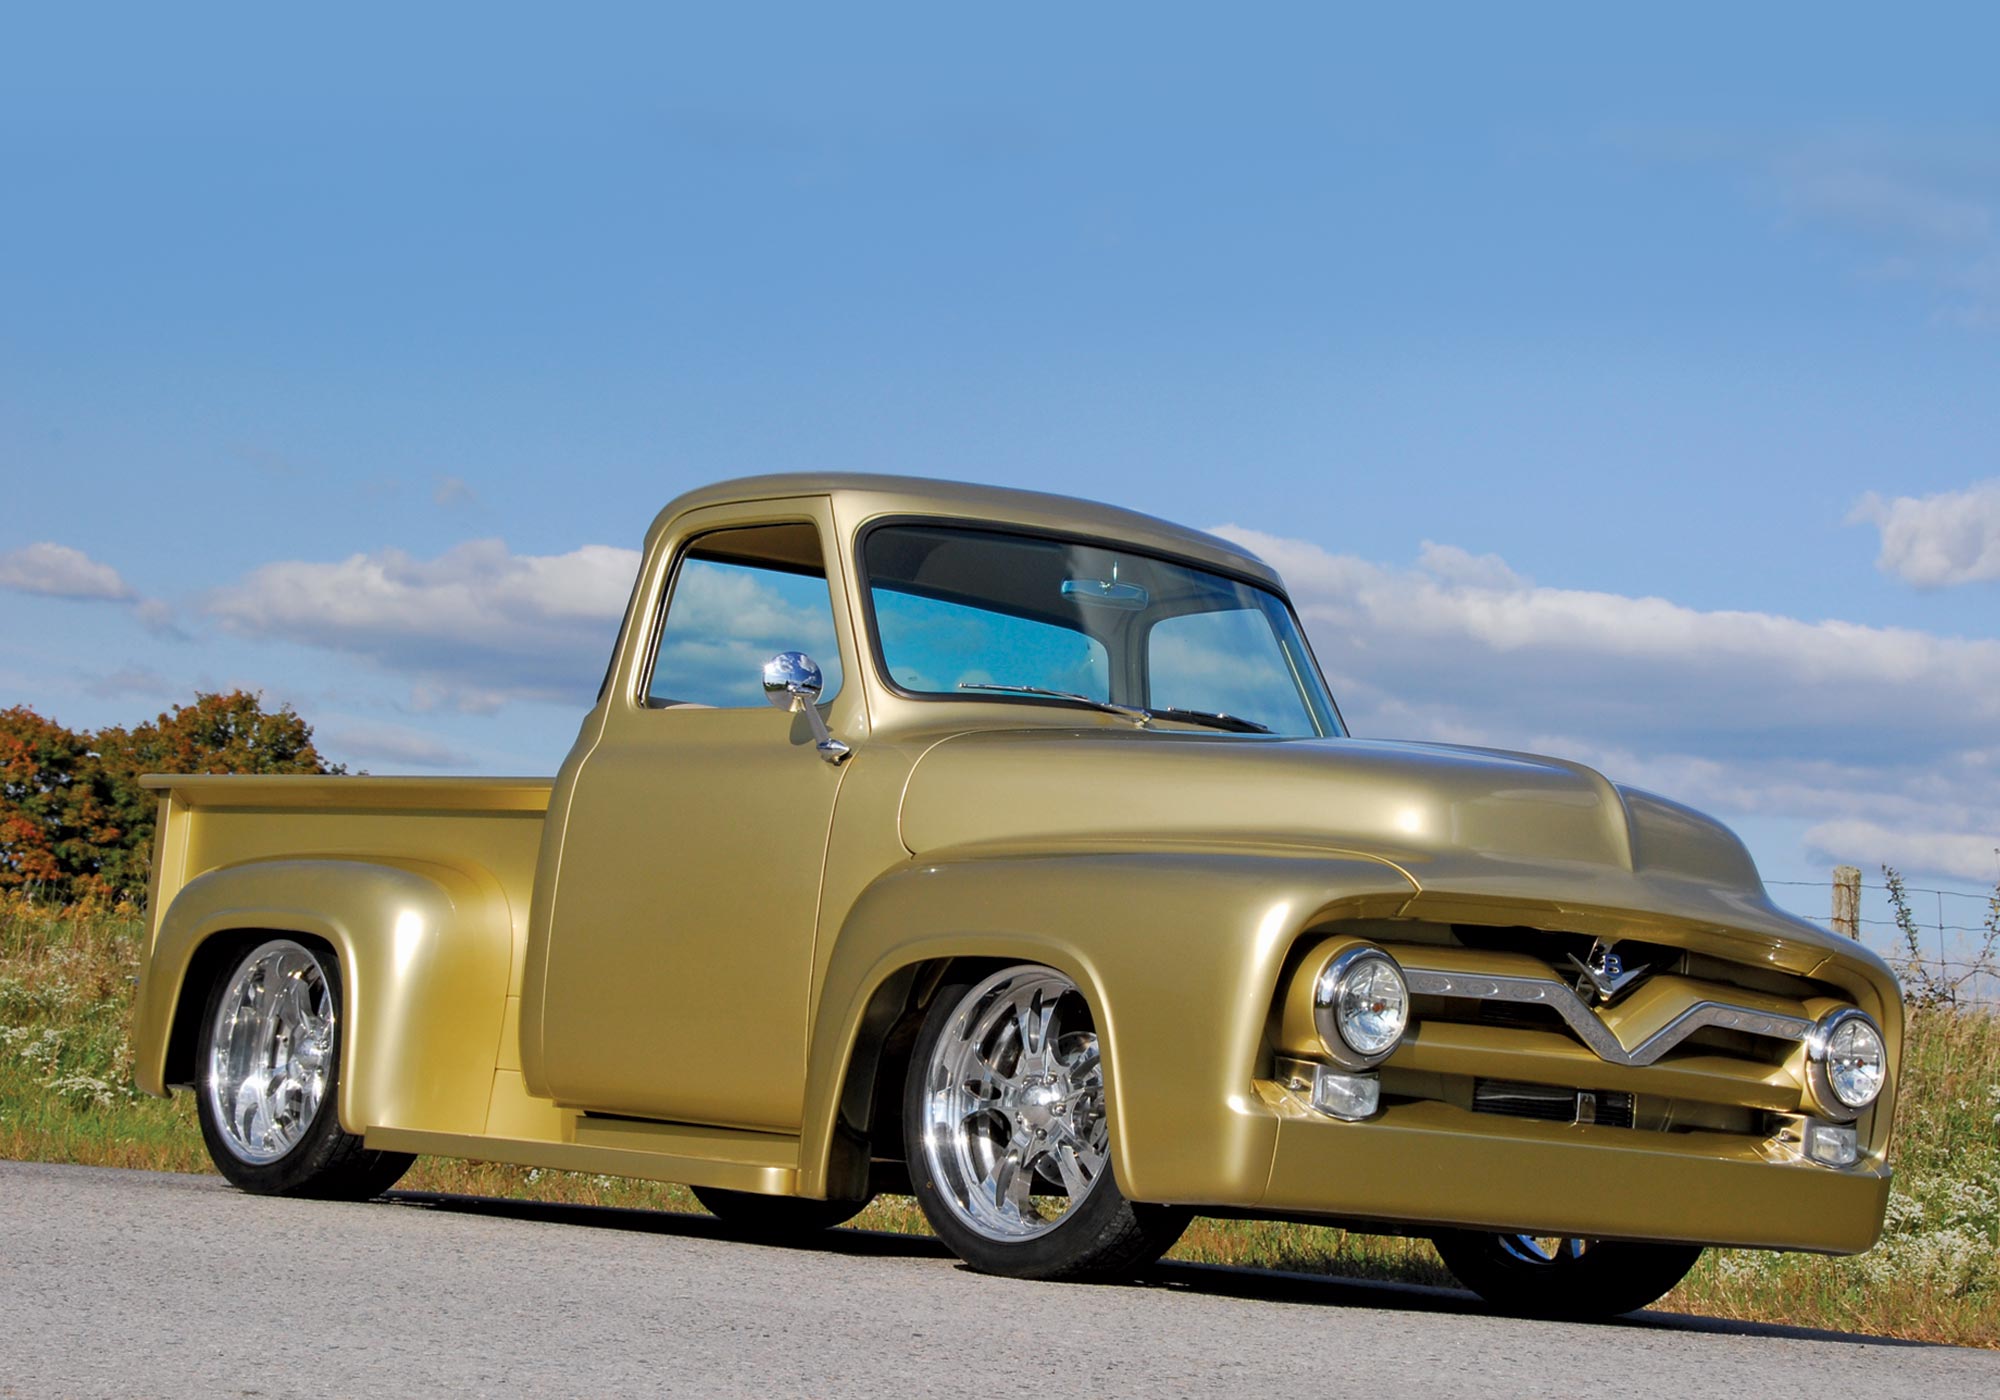 view of Steve Bloom's gold 1955 Ford F-100